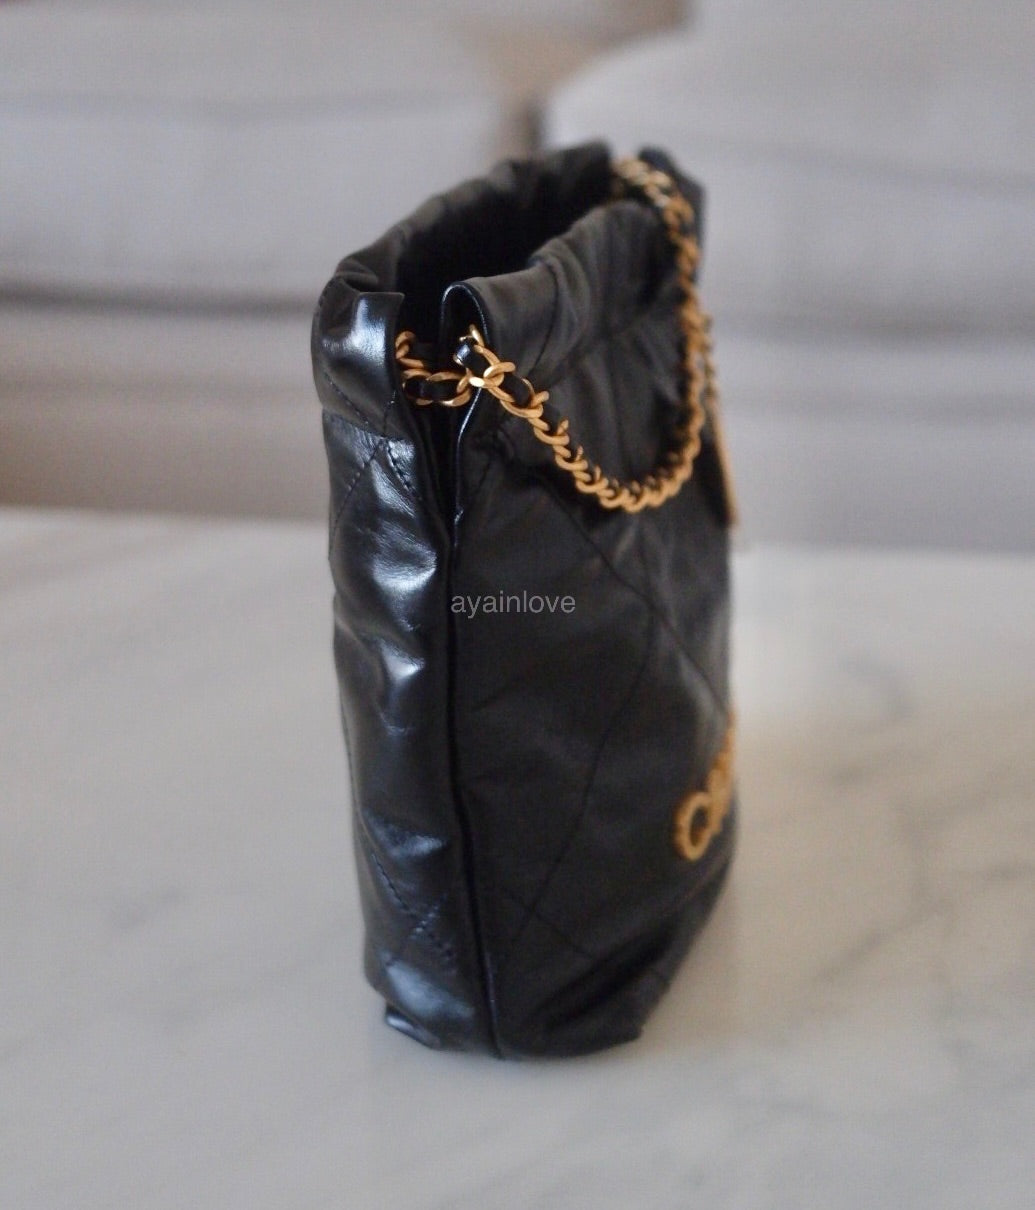 Chanel Gabrielle bag review (medium size) – TD Style